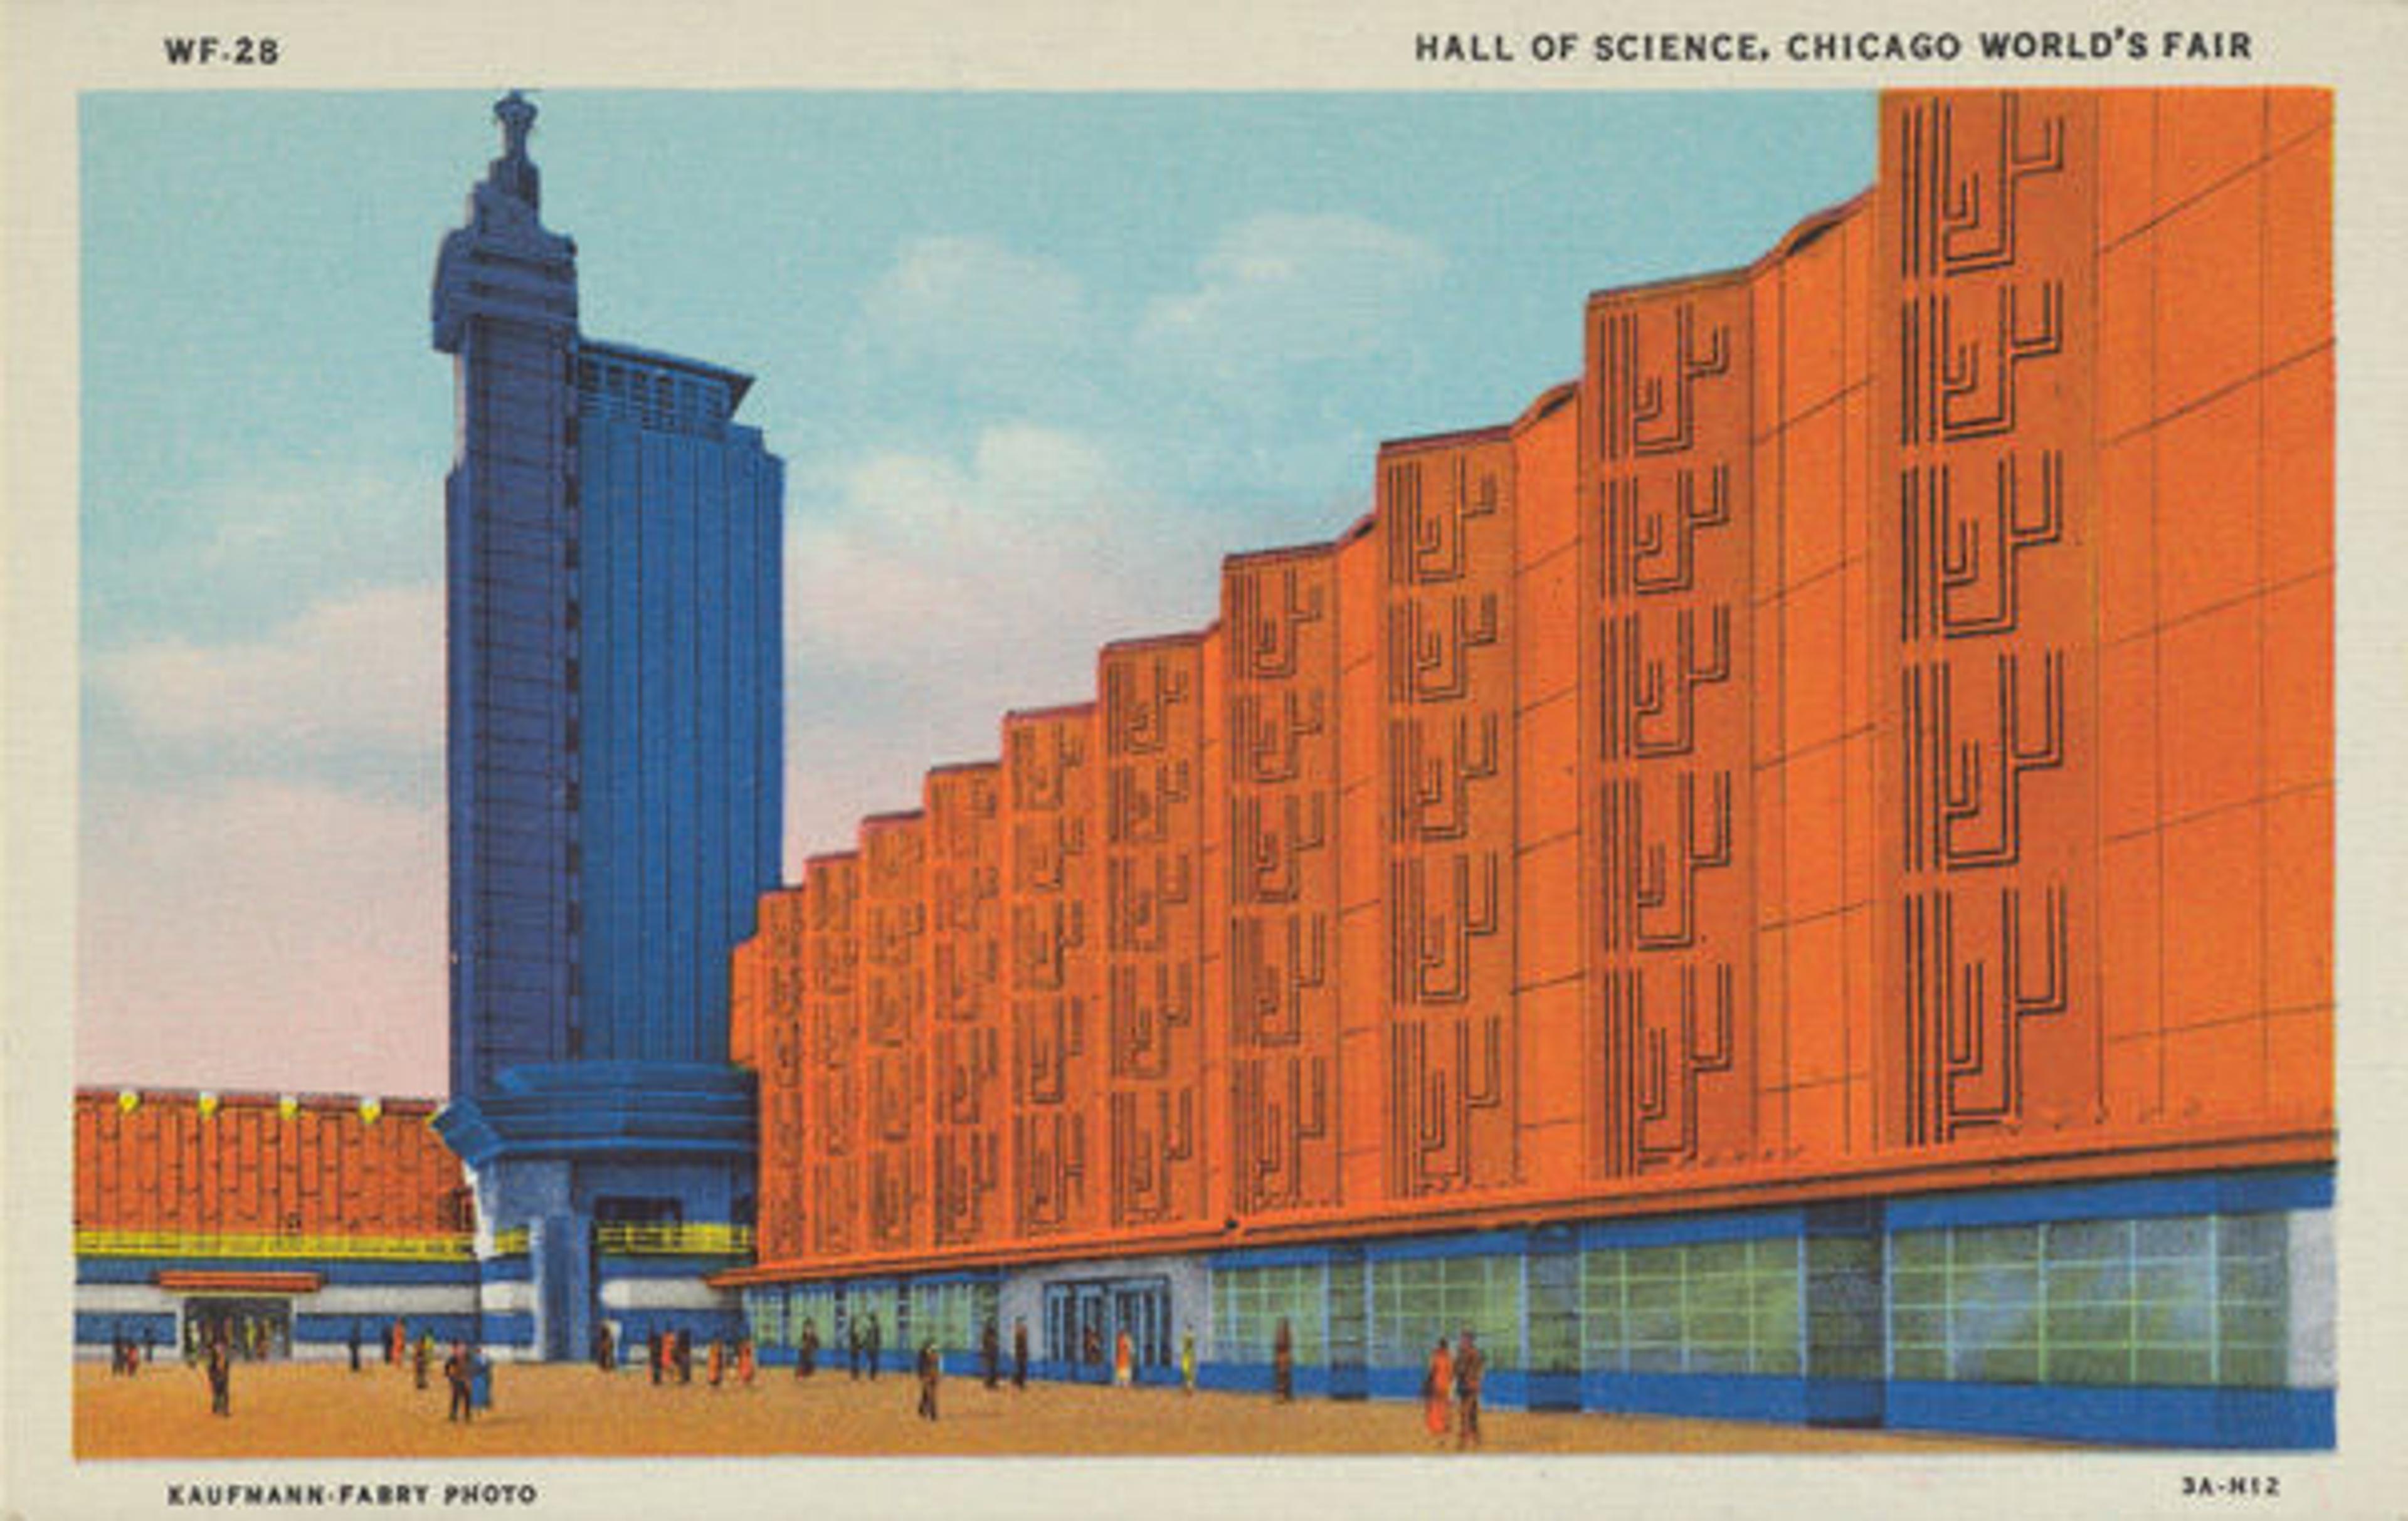 Kaufmann & Fabry Co., Chicago. Hall of Science, from the Chicago World's Fair series, 1933. Commercial color lithograph; Sheet: 3 9/16 × 5 1/2 in. (9 × 14 cm). The Metropolitan Museum of Art, New York, The Jefferson R. Burdick Collection, Gift of Jefferson R. Burdick (Burdick 435, PC225-1.13)